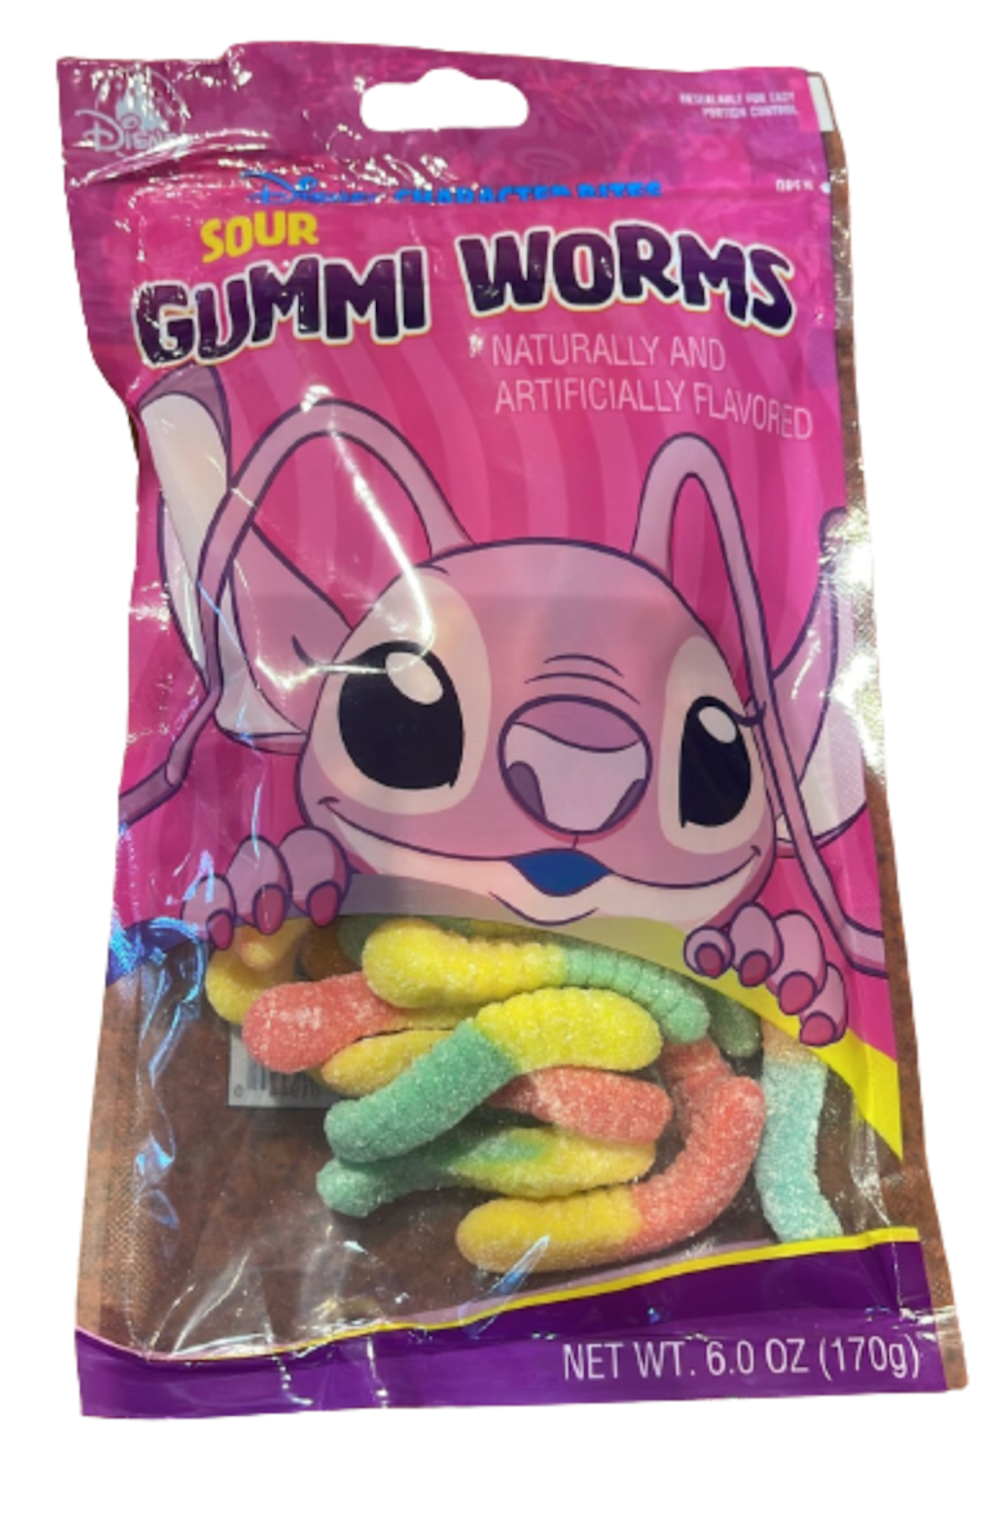 Disney Parks Sour Gummi Worms Disney Characters Fun to Share 6 OZ New Sealed